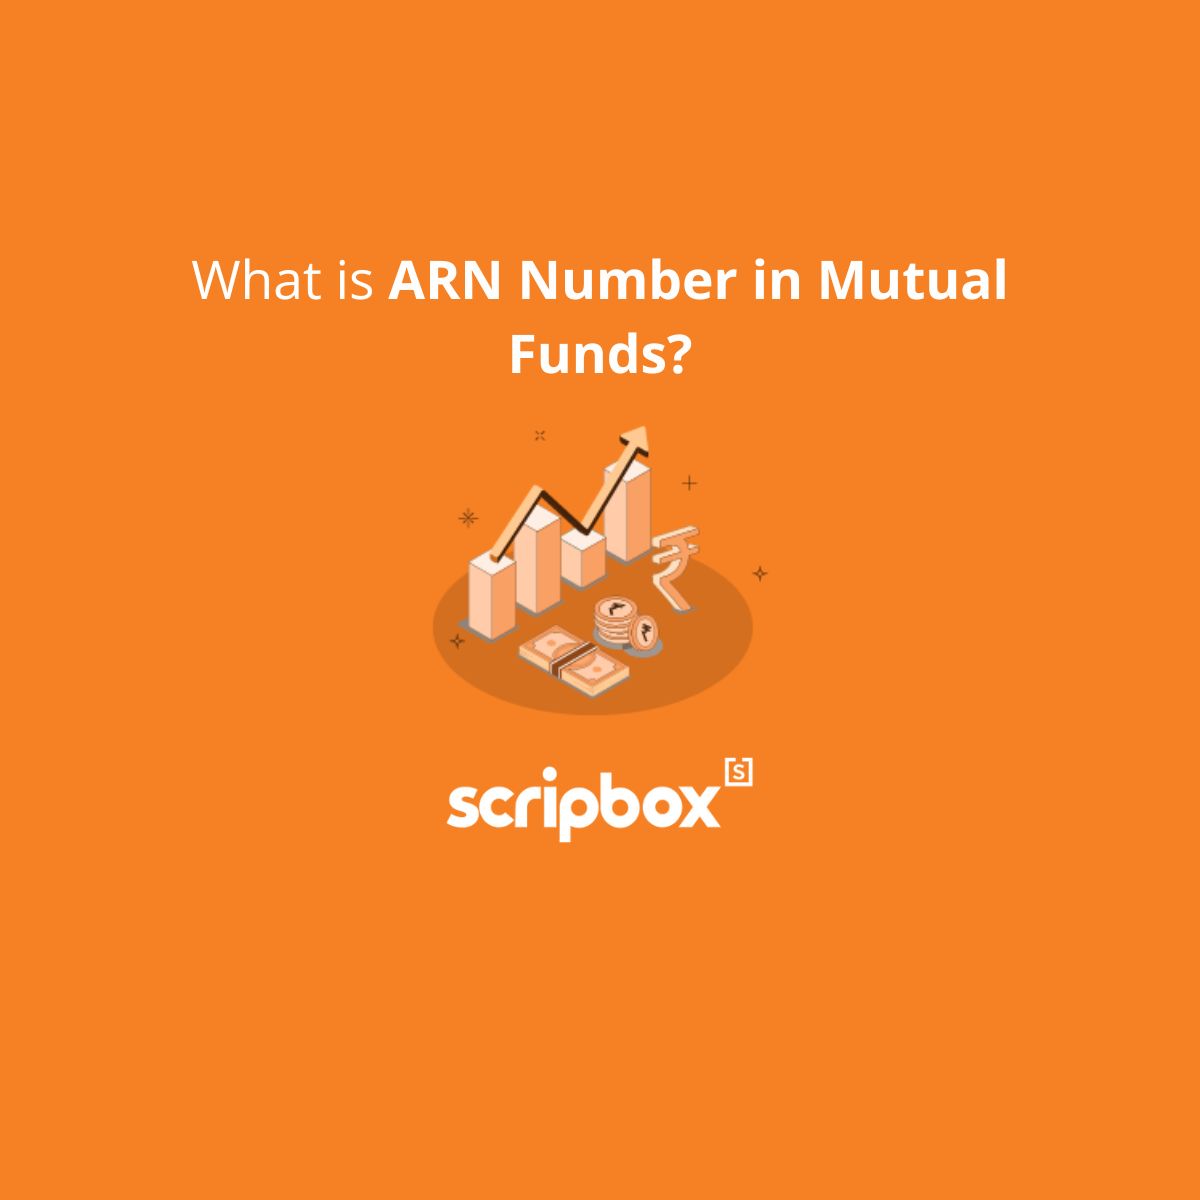 arn number in mutual funds